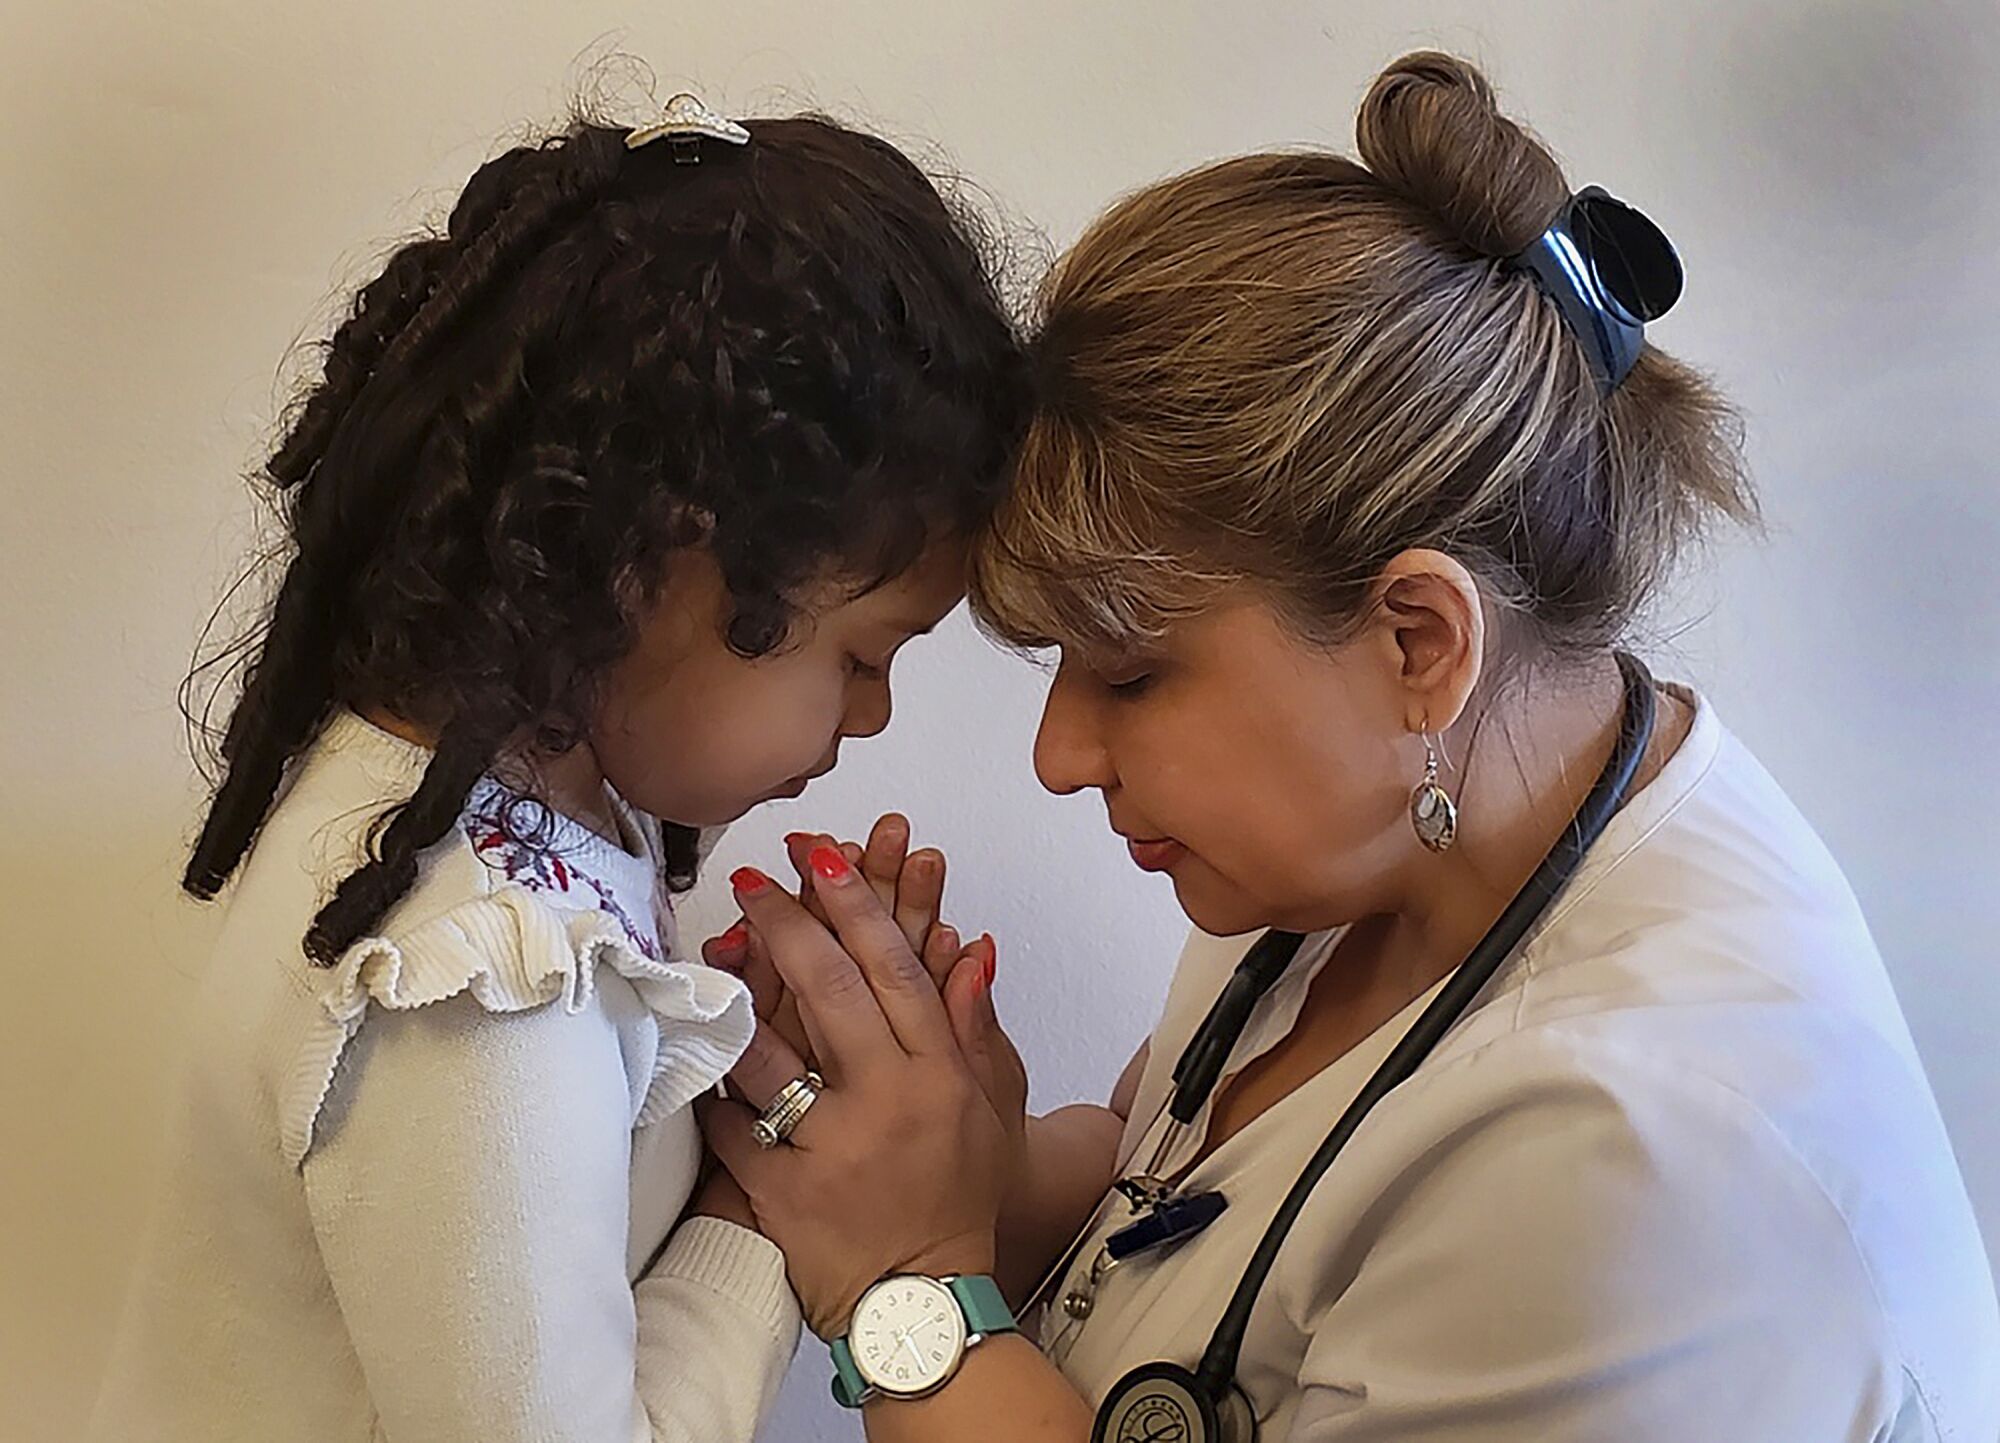 NEW YORK: Katherine Ramos, right, a nurse from Cape Coral, Fla., shares an intimate moment with her 4-year-old daughter Victoria on April 1 at a relative's home in Patterson, N.Y., where they are staying after Ramos answered New York's call for volunteers to reinforce staff at hospitals overwhelmed by the coronavirus pandemic.